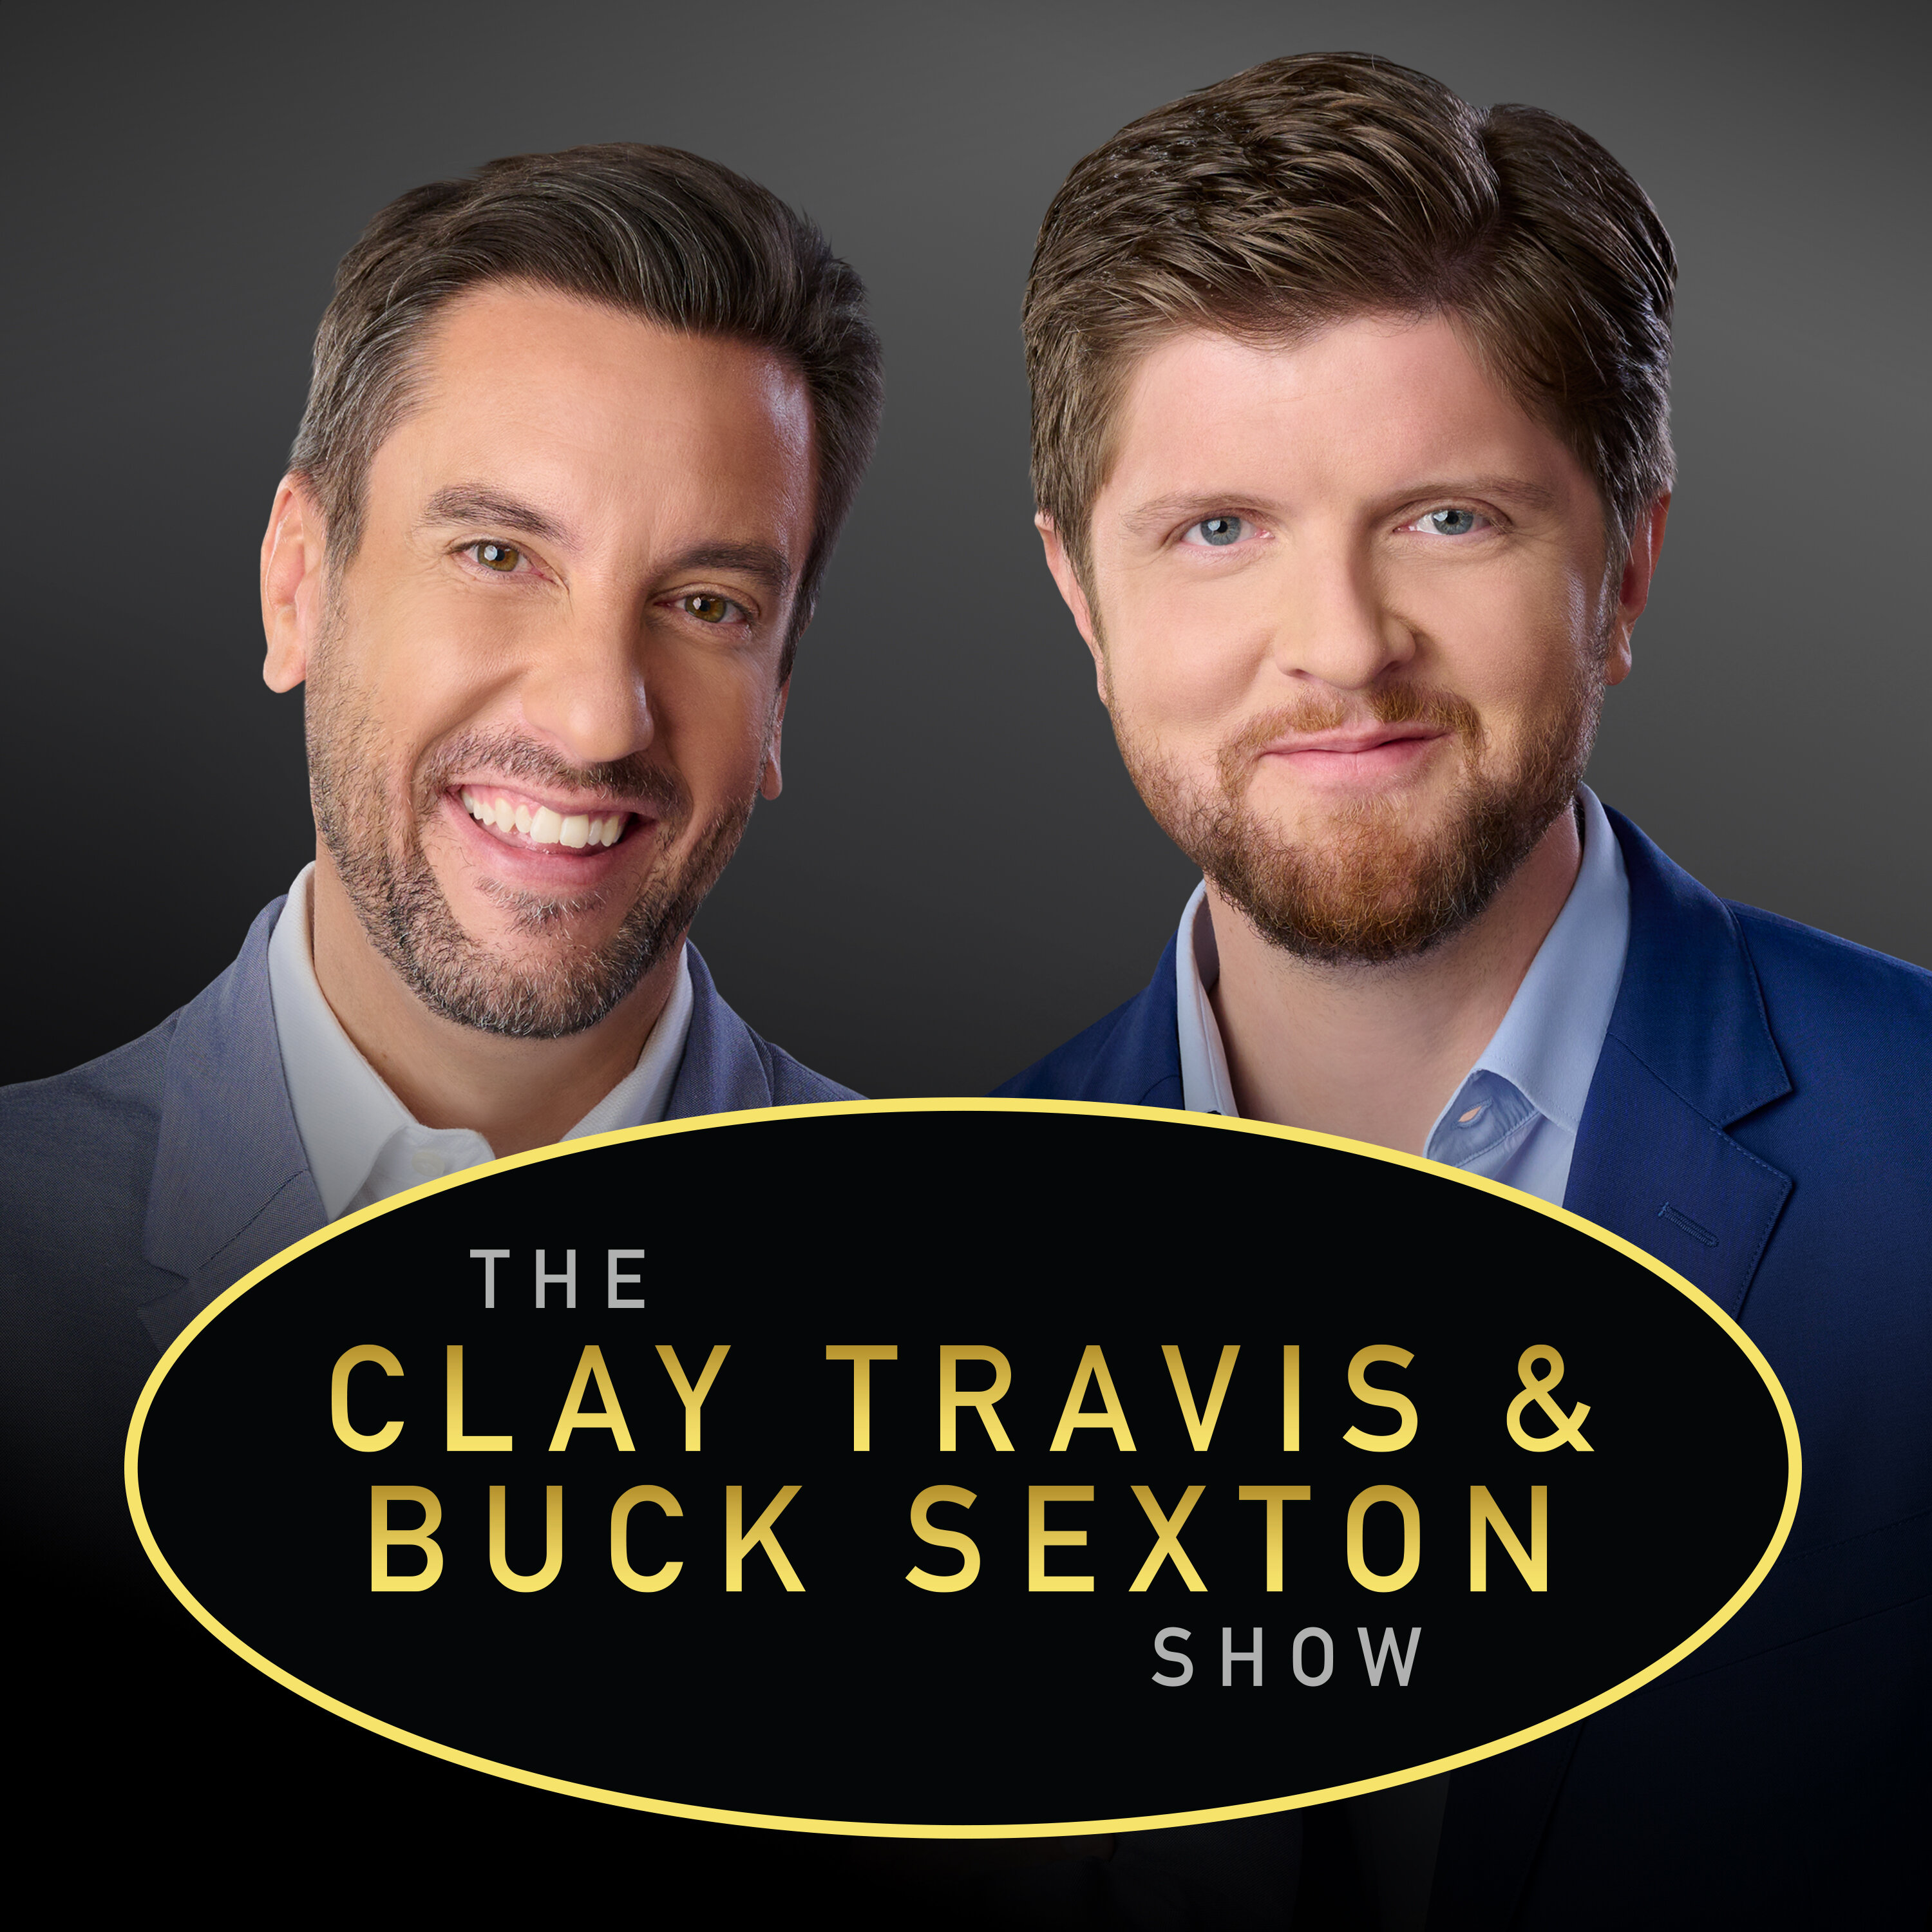 Clay Travis and Buck Sexton Show H1 – Aug 17 2022